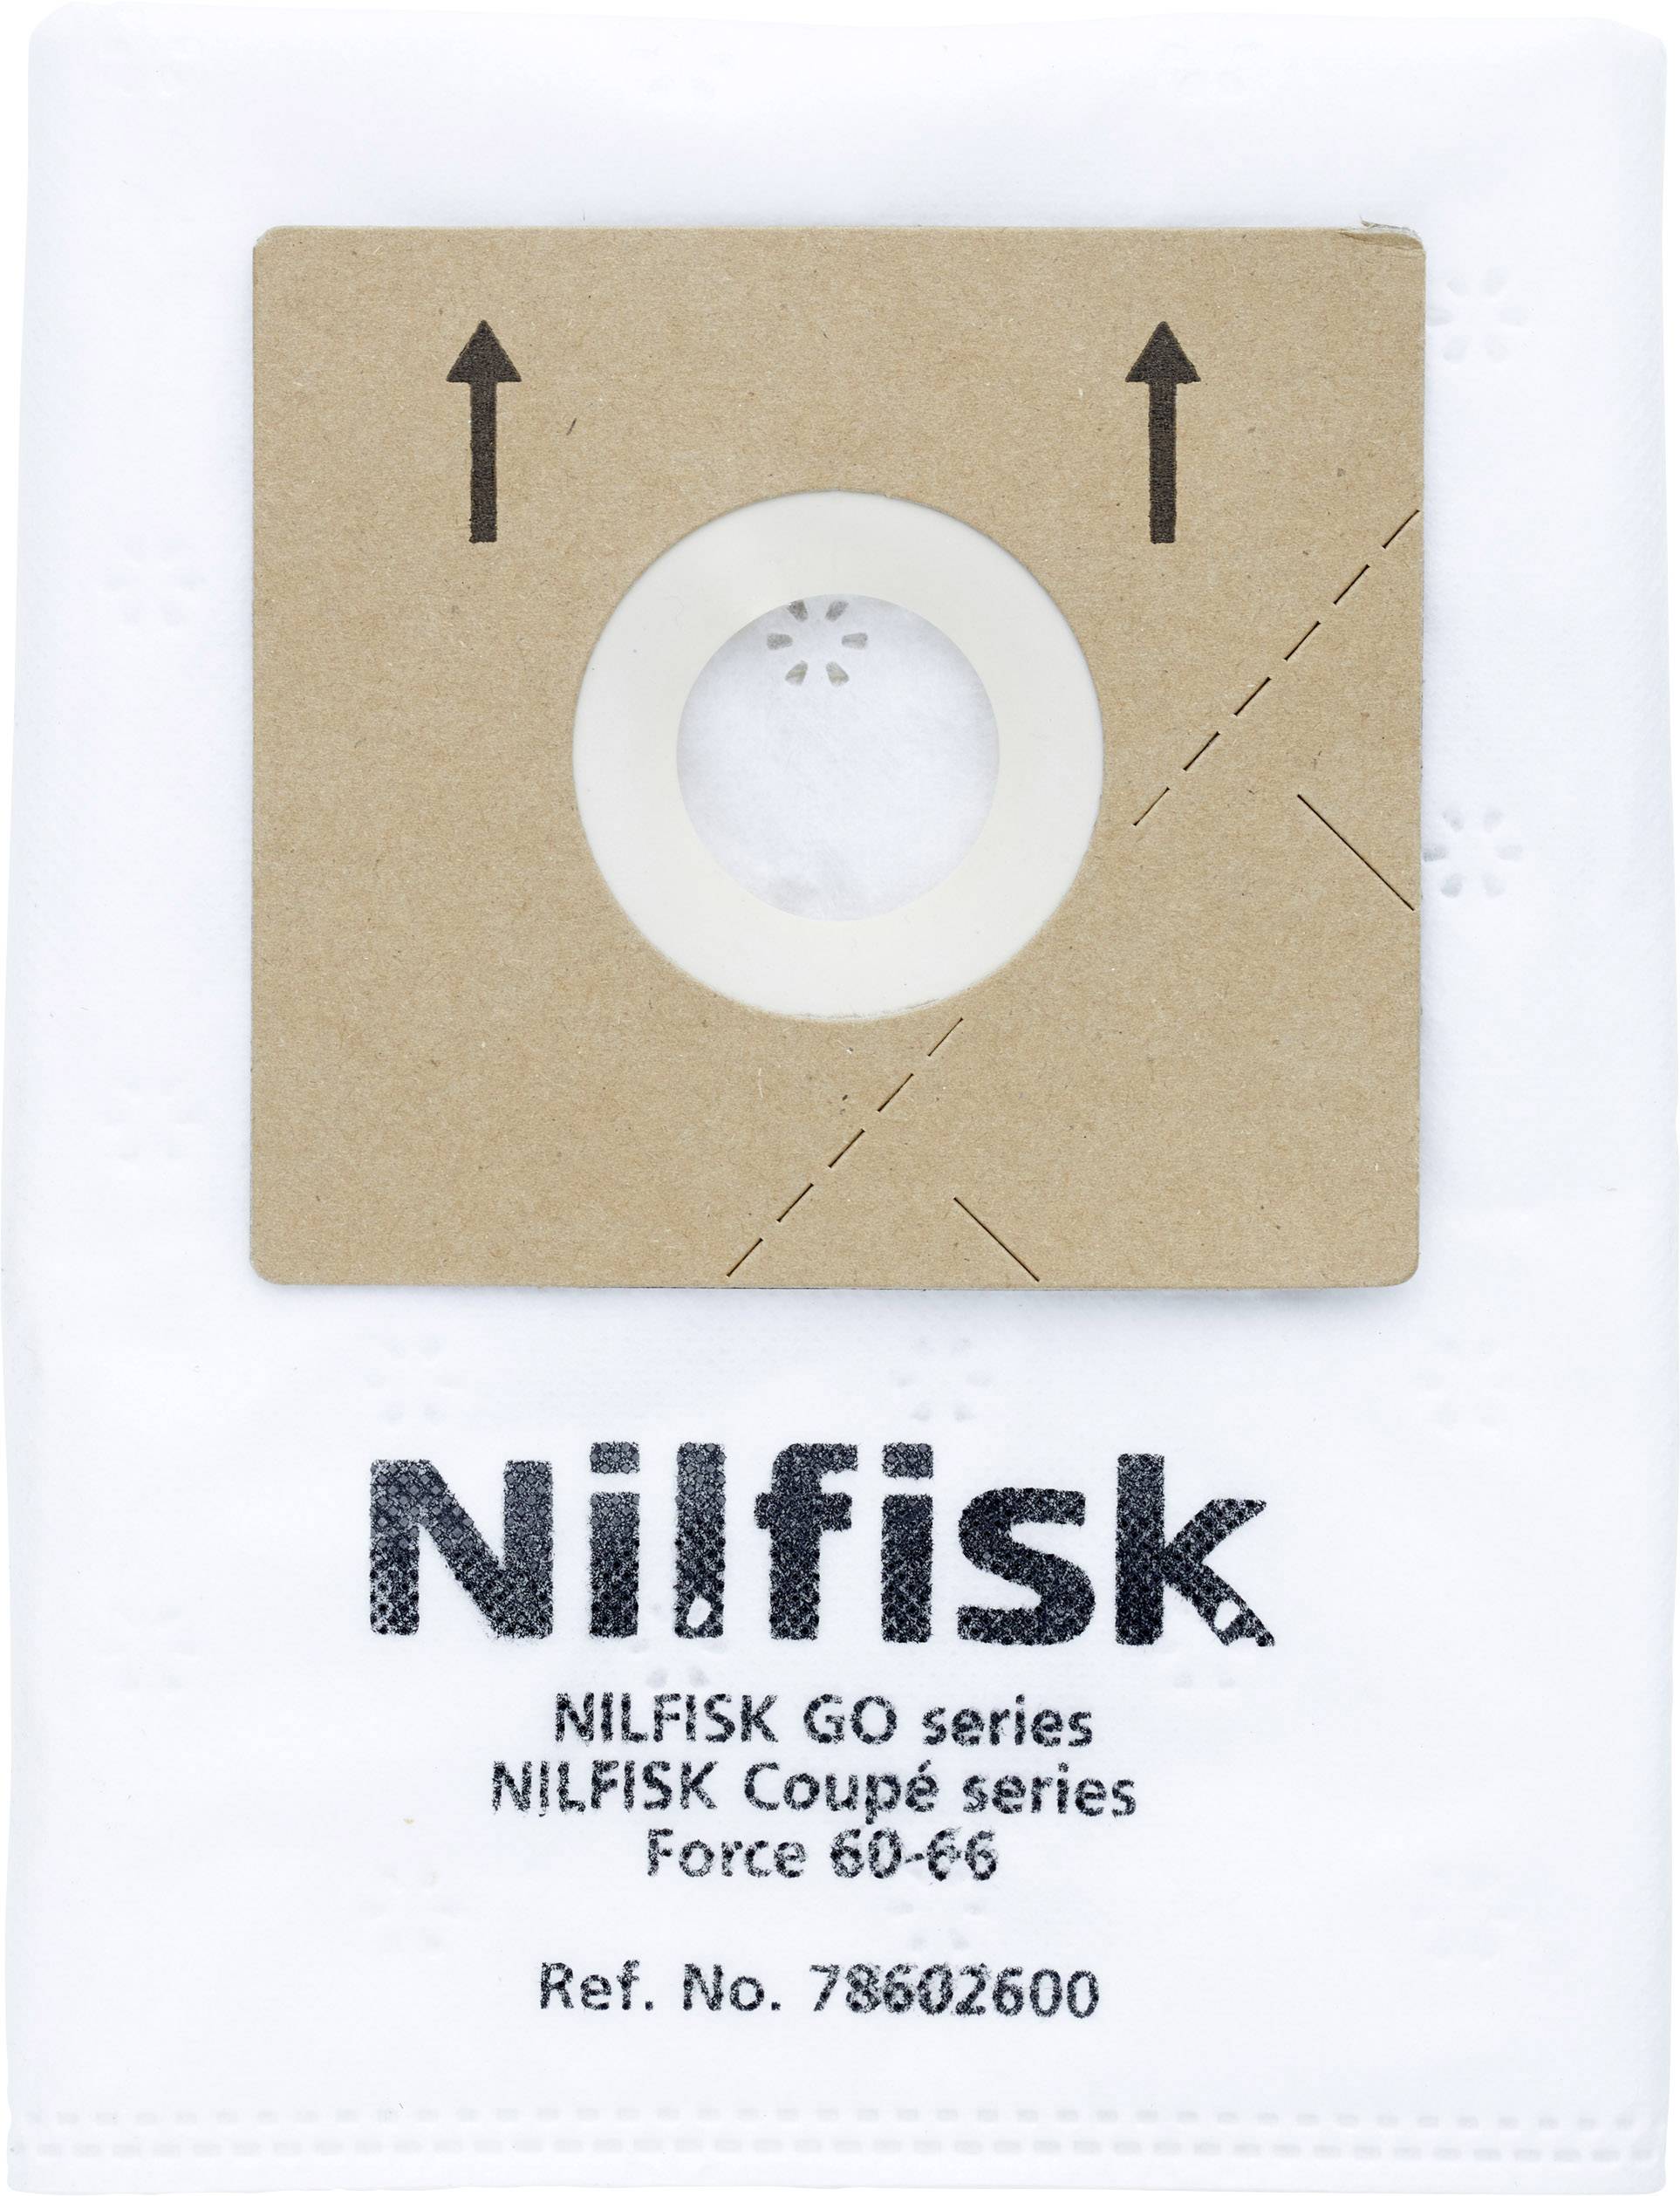 NILFISK-ALTO Staubsaugerbeutel Coupe & Go Serie 78602600 - Type: Coupé and Go & Force 60/66Packungsi